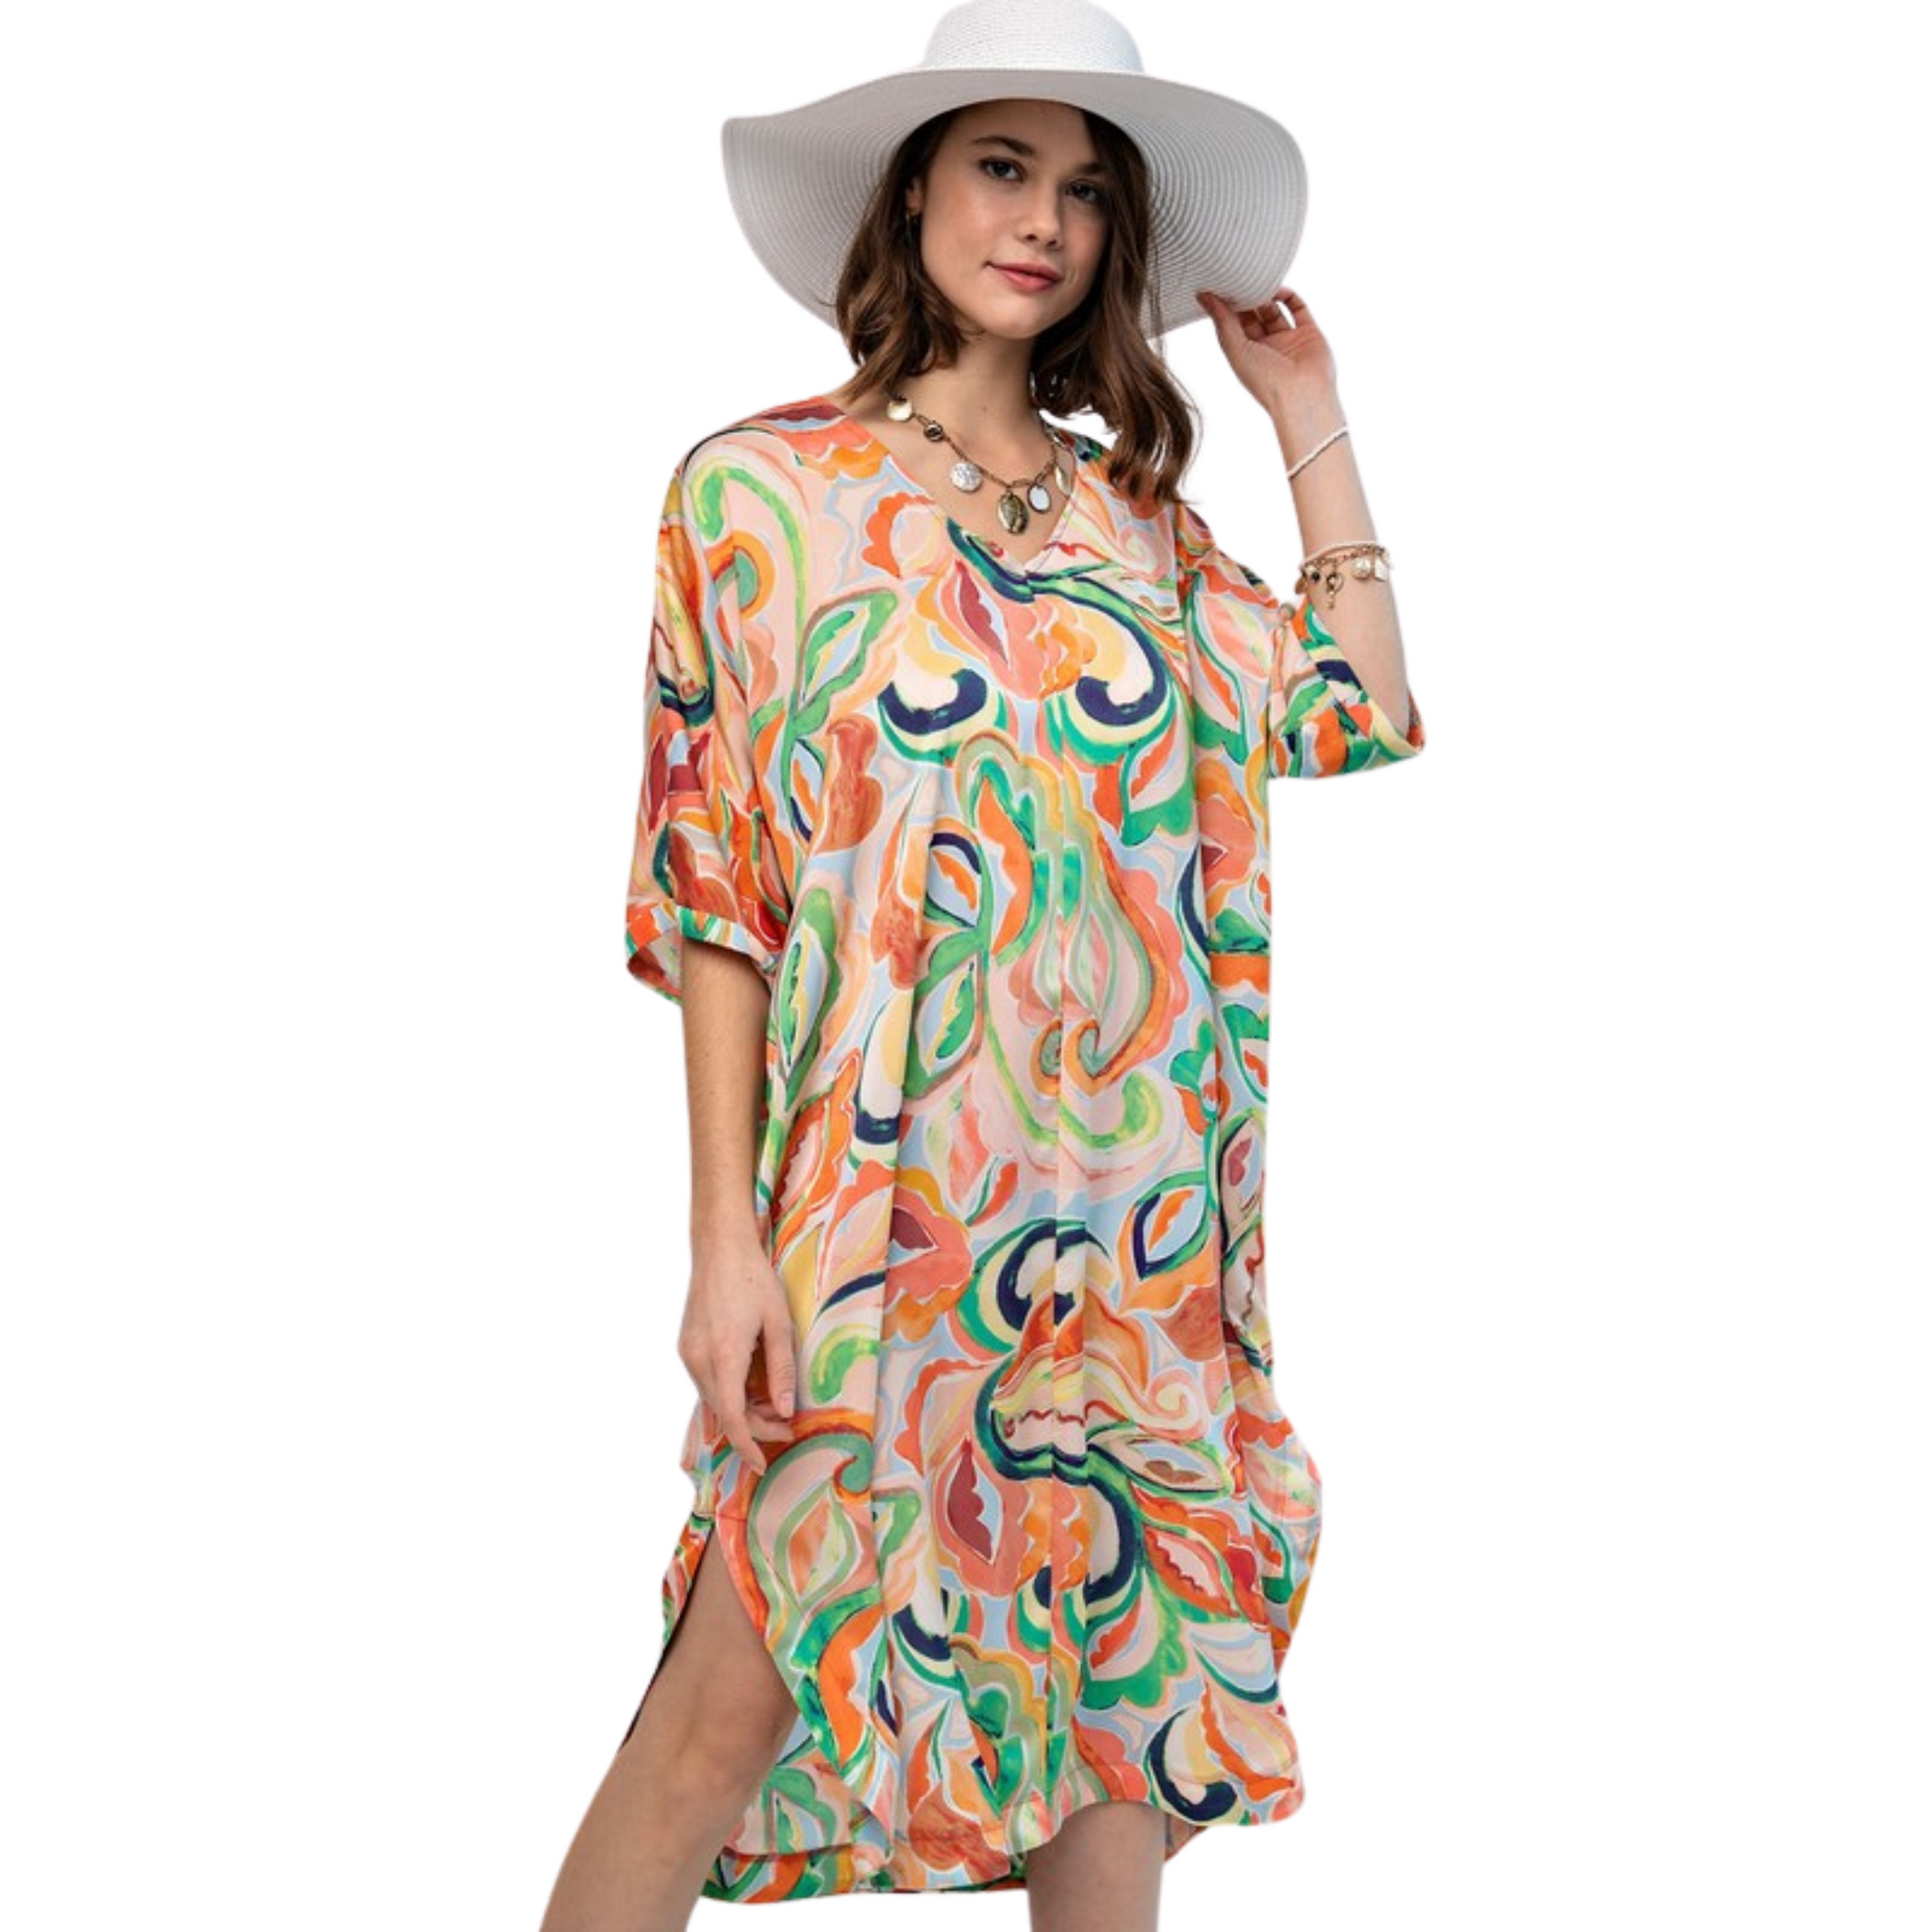 This Printed Dobby Dress is designed to fit any body type. The lightweight midi length, plus size silhouette ensures day-long comfort. Perfect for any casual occasion, this dress is sure to become a wardrobe staple.